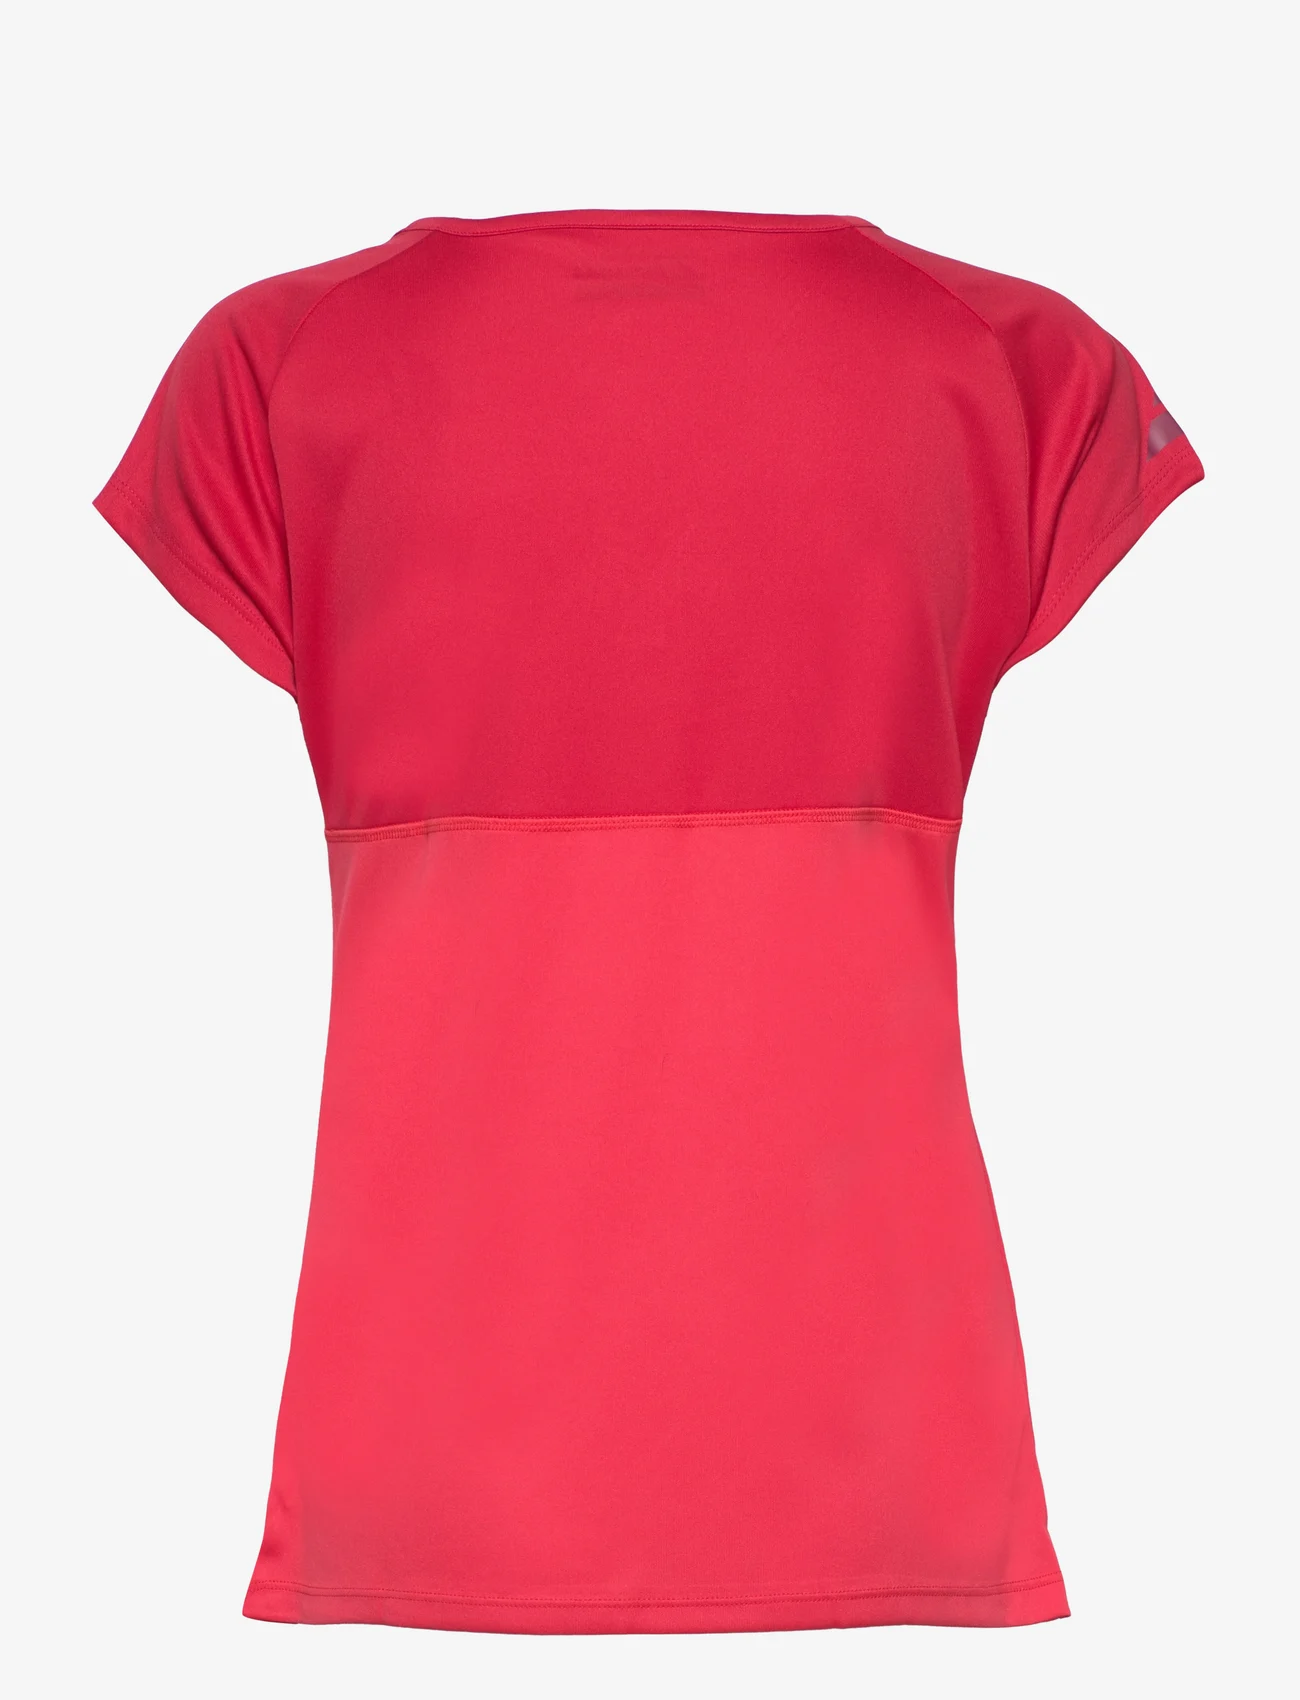 Babolat - PLAY CAP SLEEVE TOP WOMEN - t-shirts - 5027 tomato red - 1